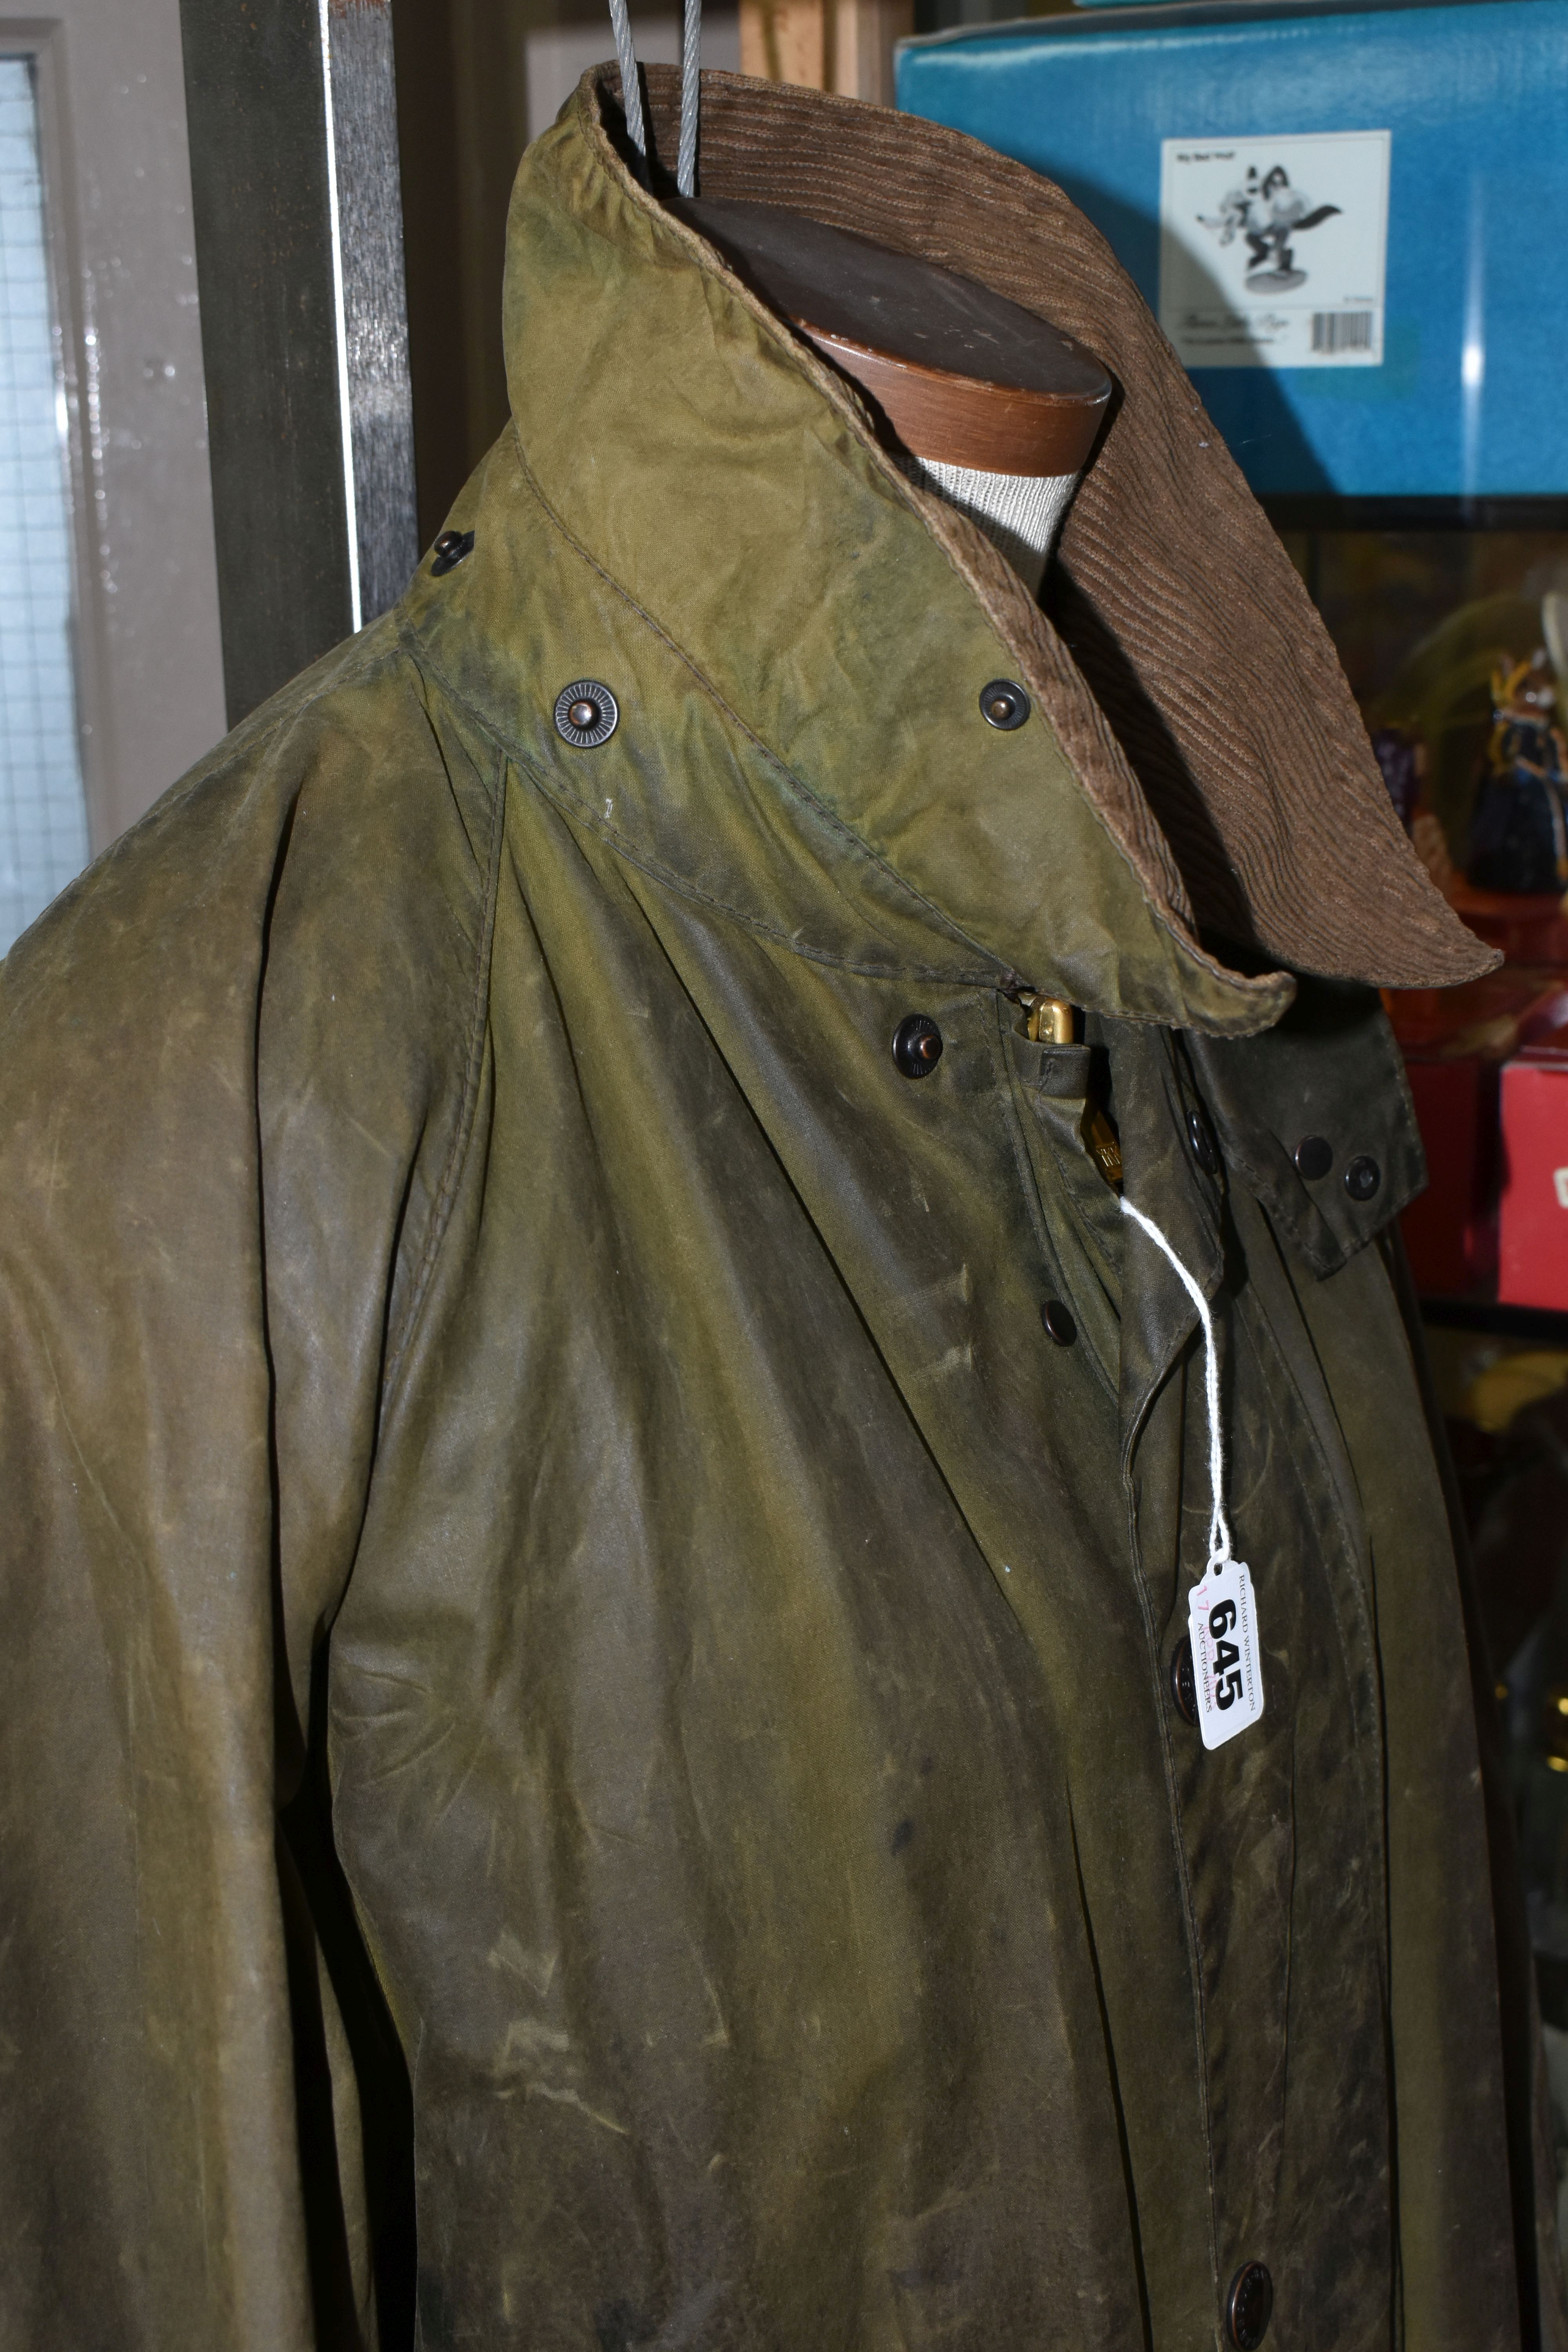 A BARBOUR WAX JACKET, 'Gamefair' style, size 102cm/40 , with detachable hood (1) (Condition - Image 4 of 9